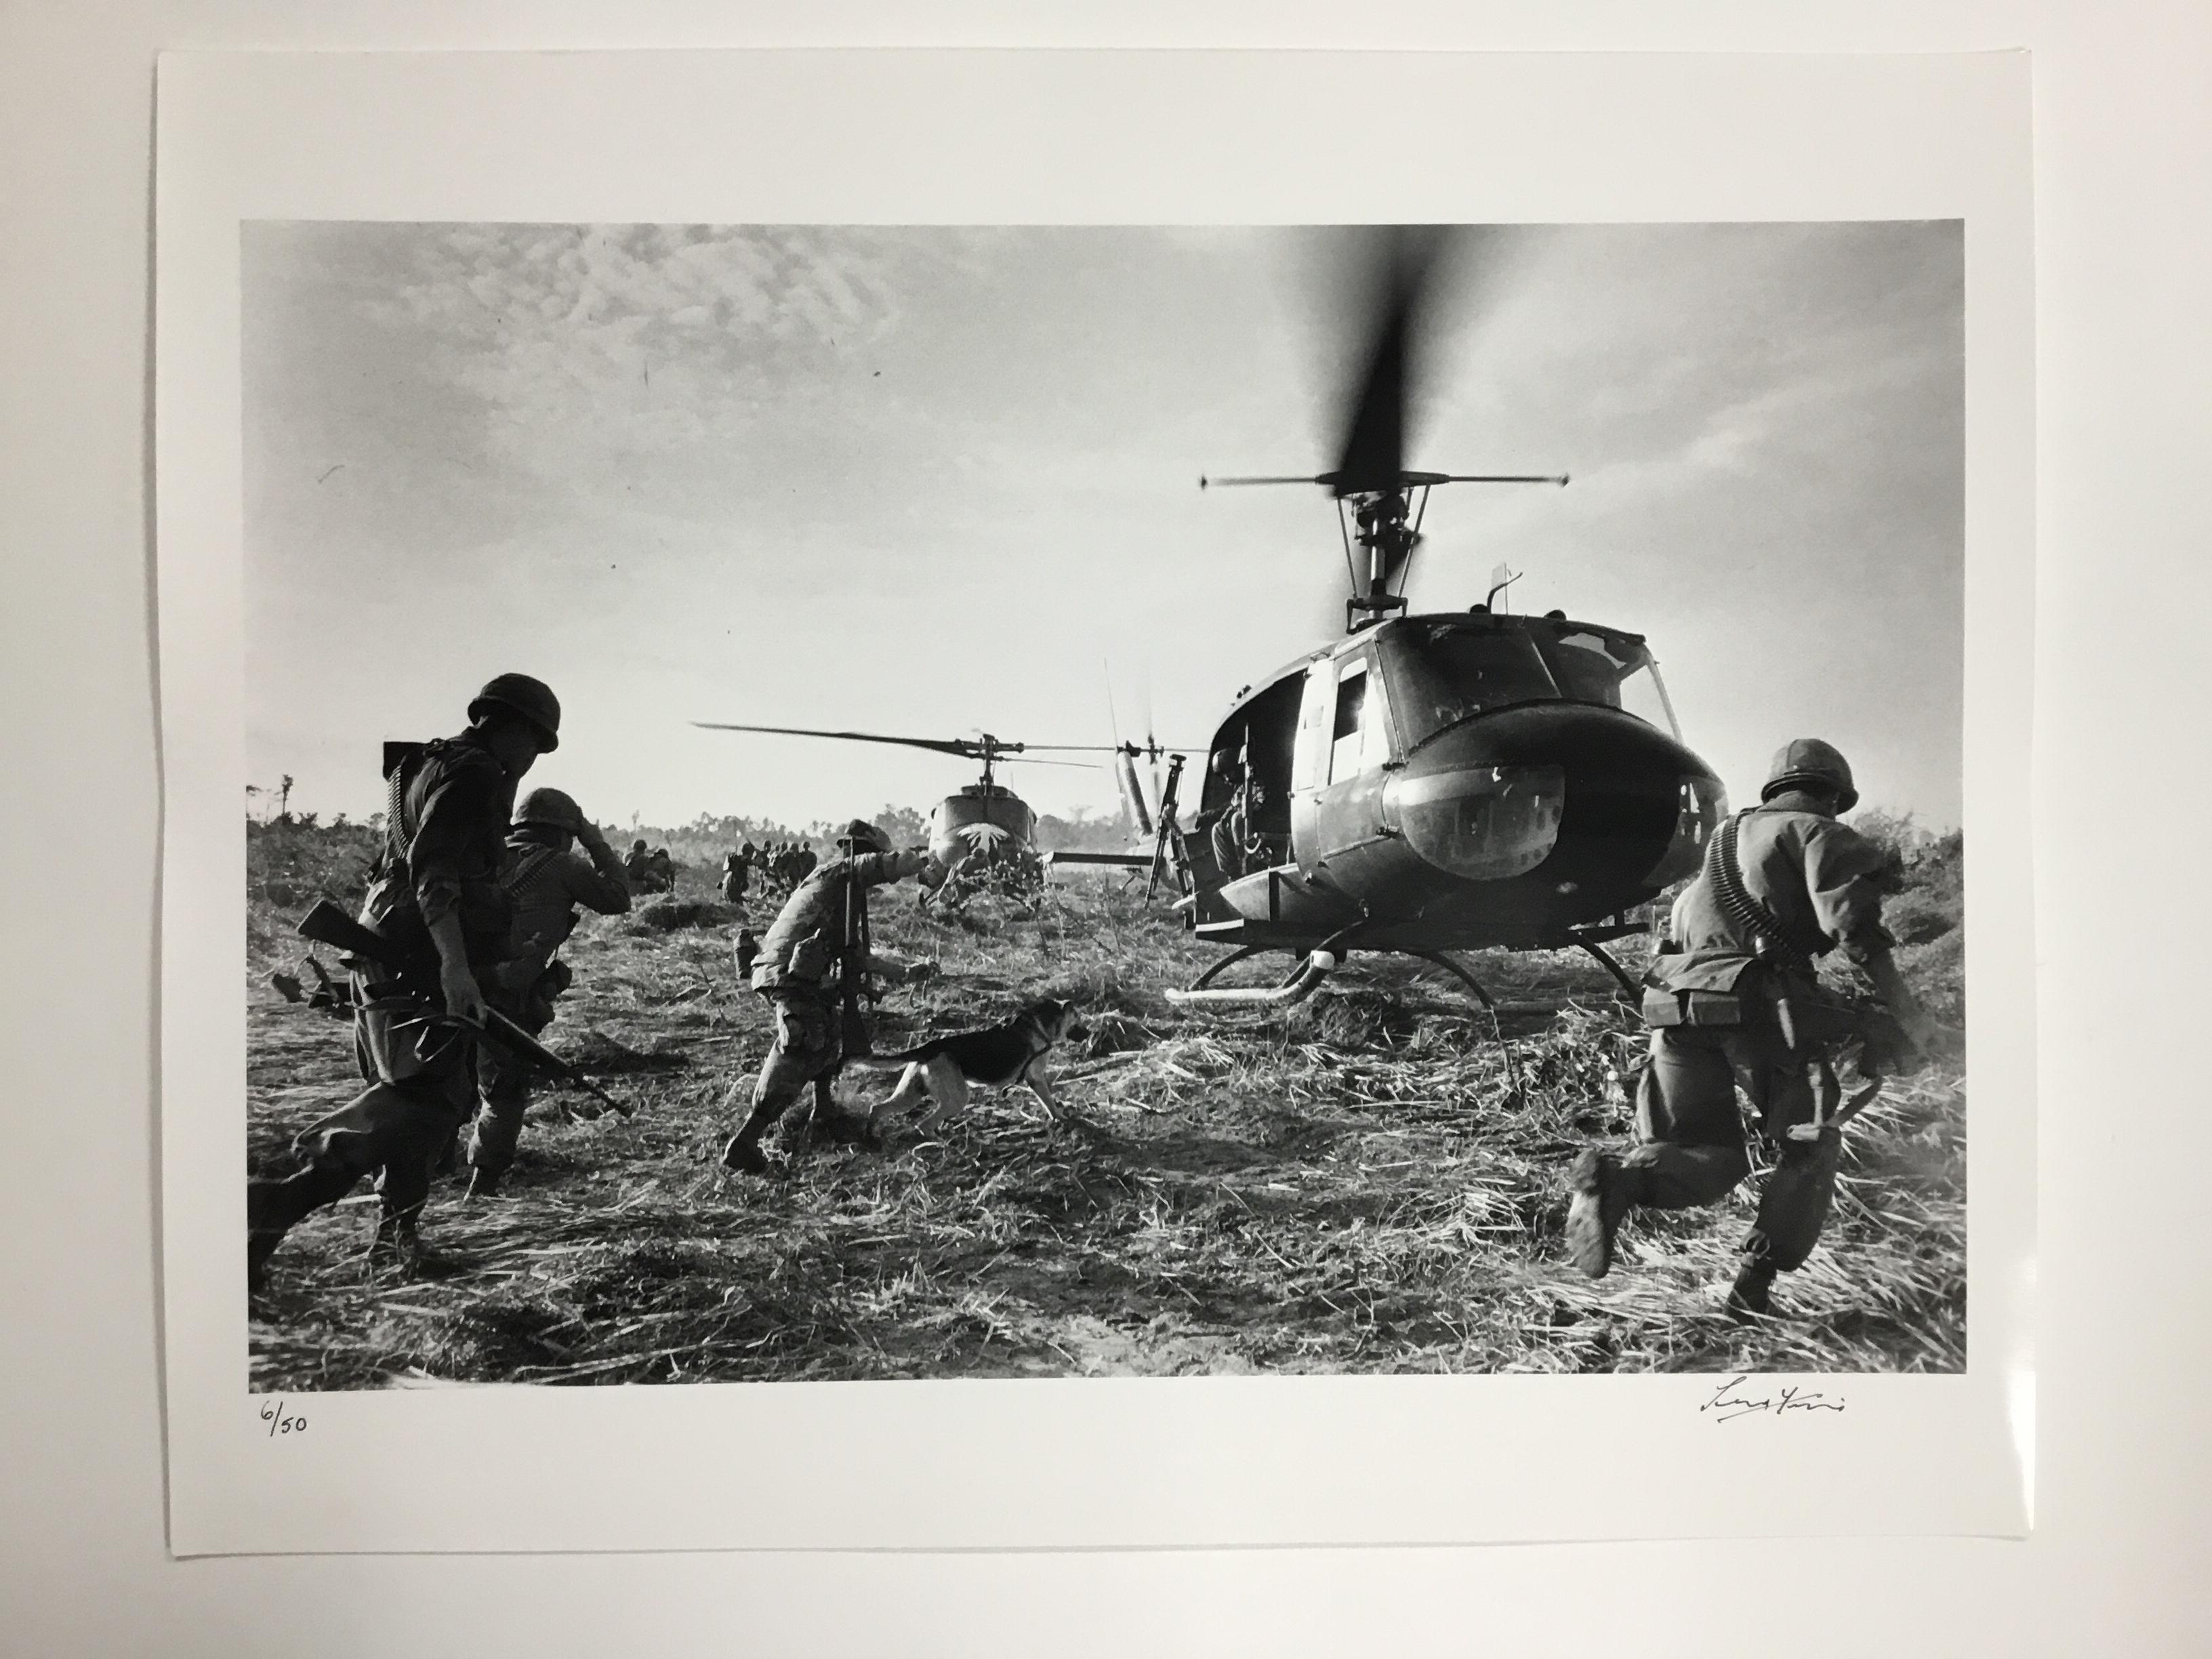 US marines running towards a Bell (UH 1) Huey helicopter and crew in the Tay Ninh area of Vietnam. November 4, 1968 (Photo by Terry Fincher/Getty Images)

DETAILS
- Rare signed print, signature on front.
- Hand printed silver gelatin fibre